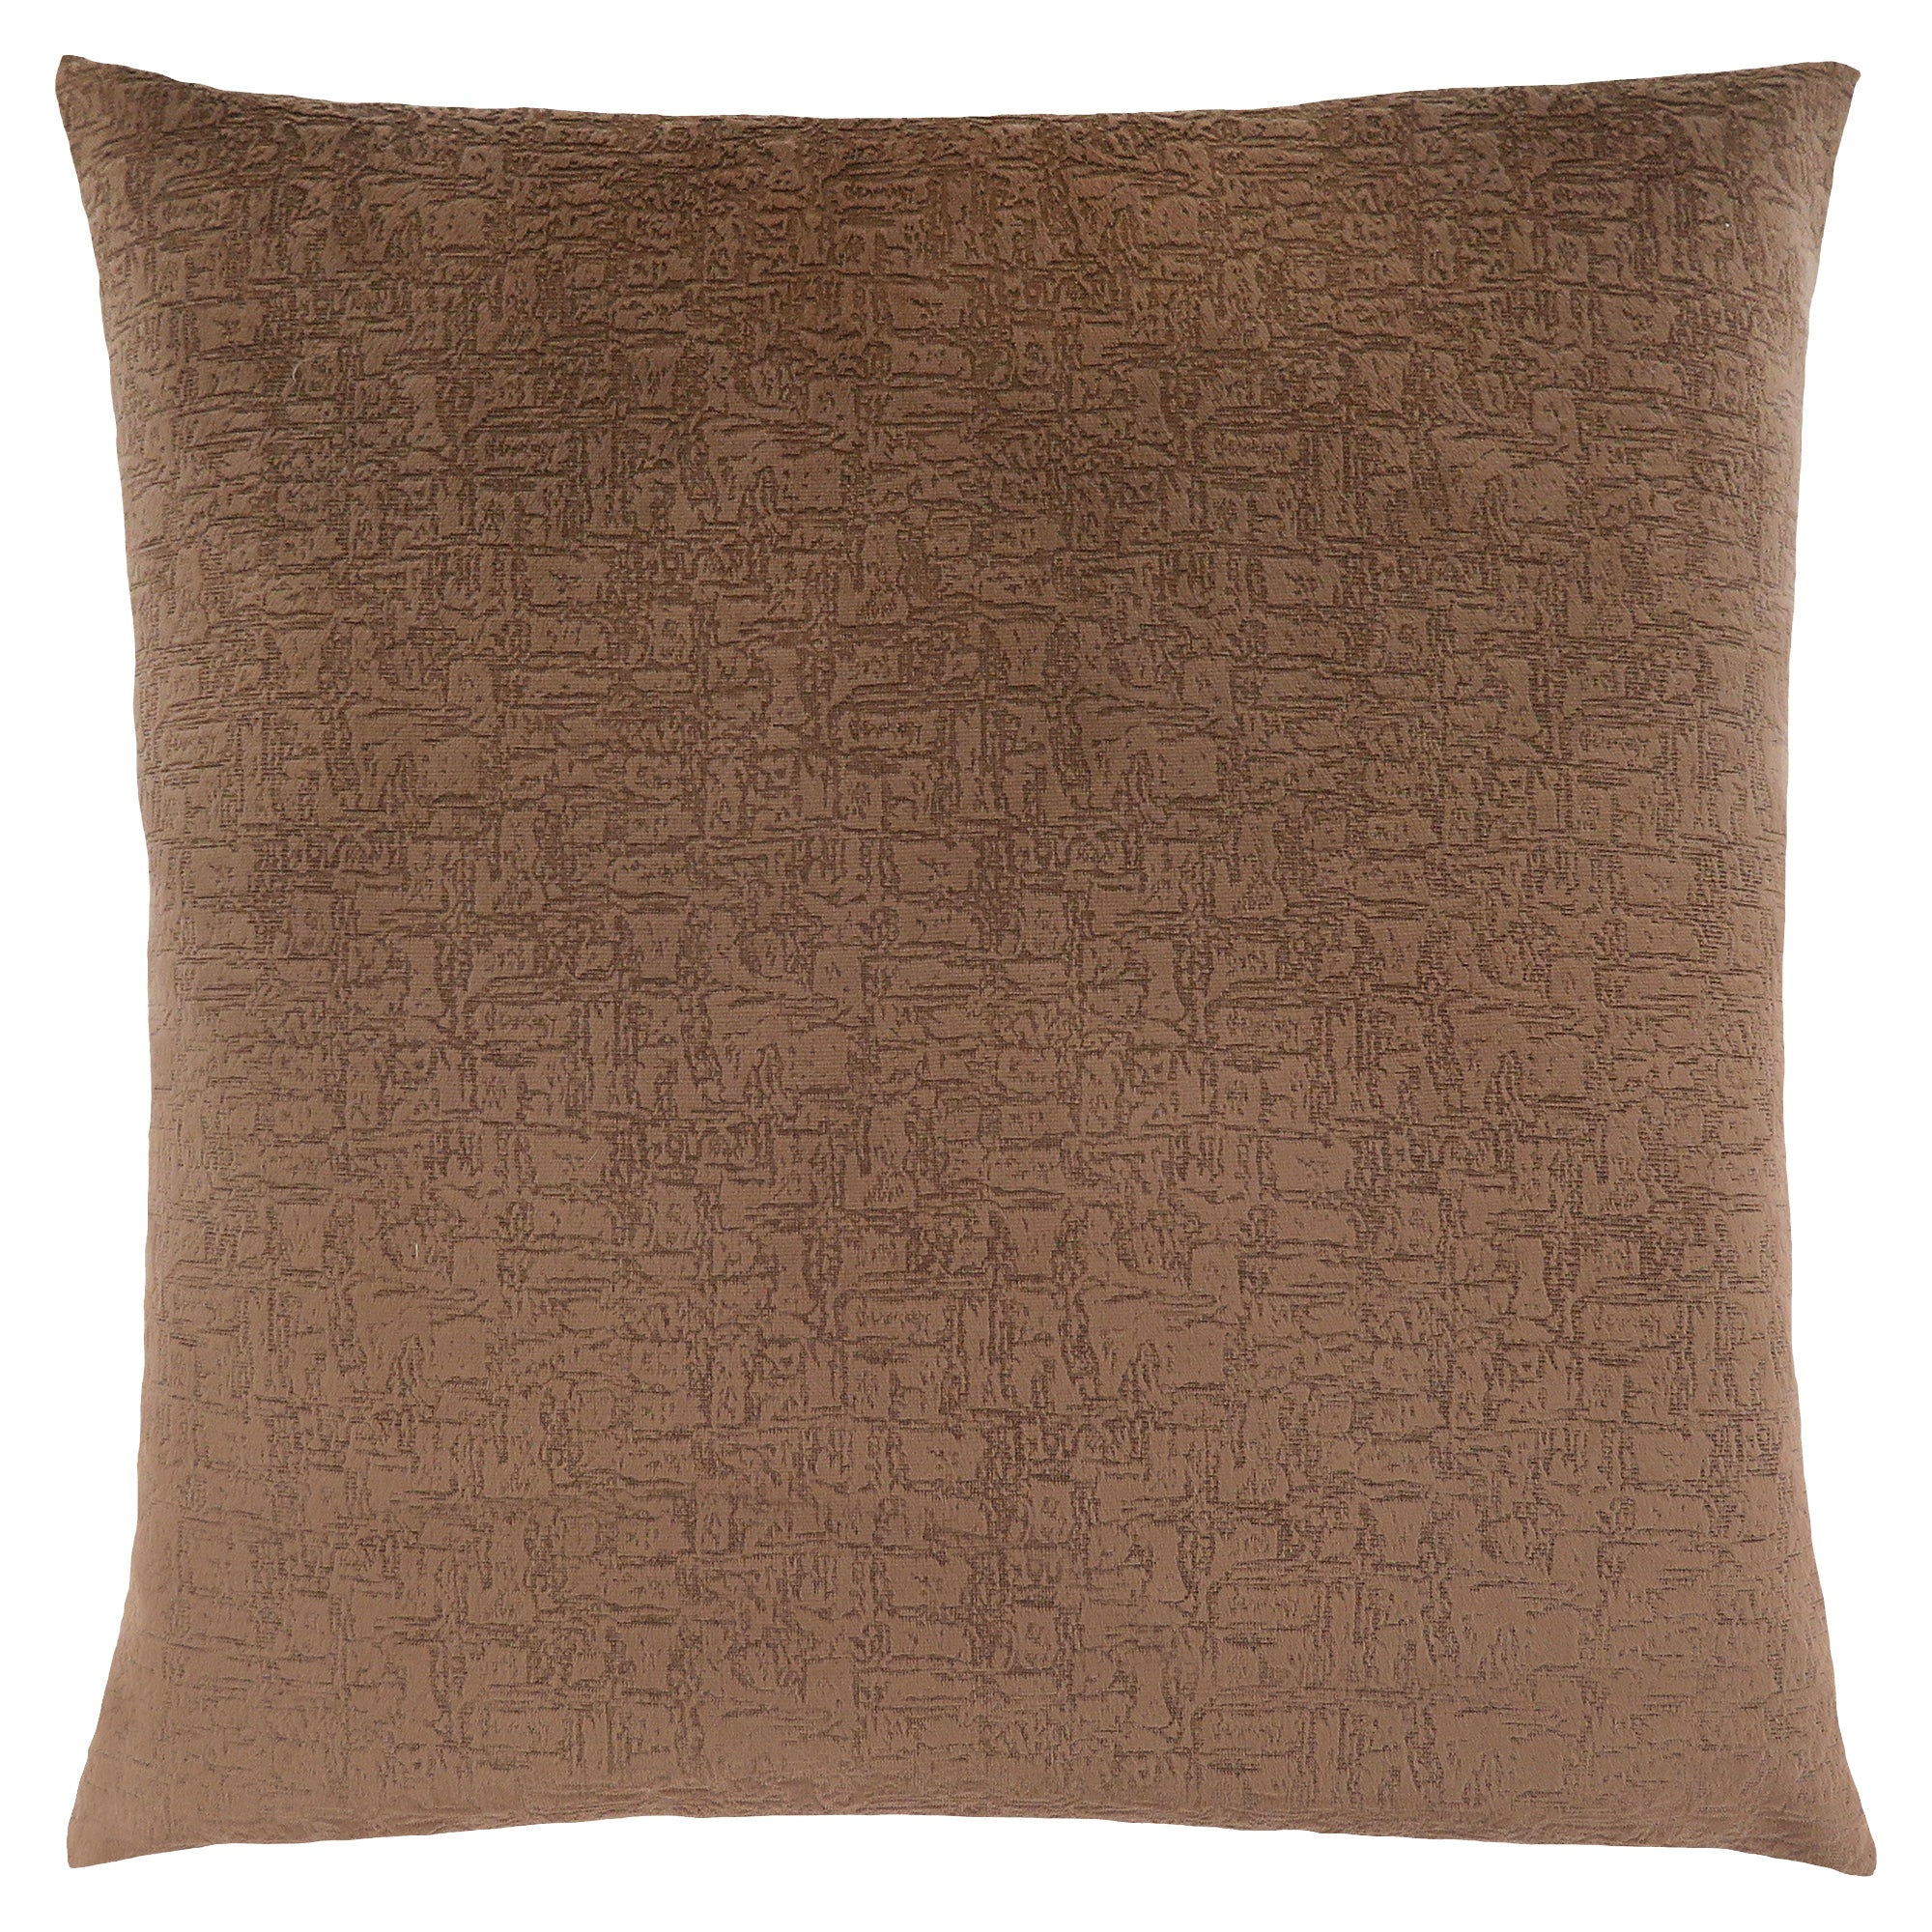 MN-749276    Pillows, 18 X 18 Square, Insert Included, Decorative Throw, Accent, Sofa, Couch, Bed, Plush Velvet Finish, Soft Polyester Fabric, Hypoallergenic Soft Polyester Insert, Light Brown, Contemporary, Modern